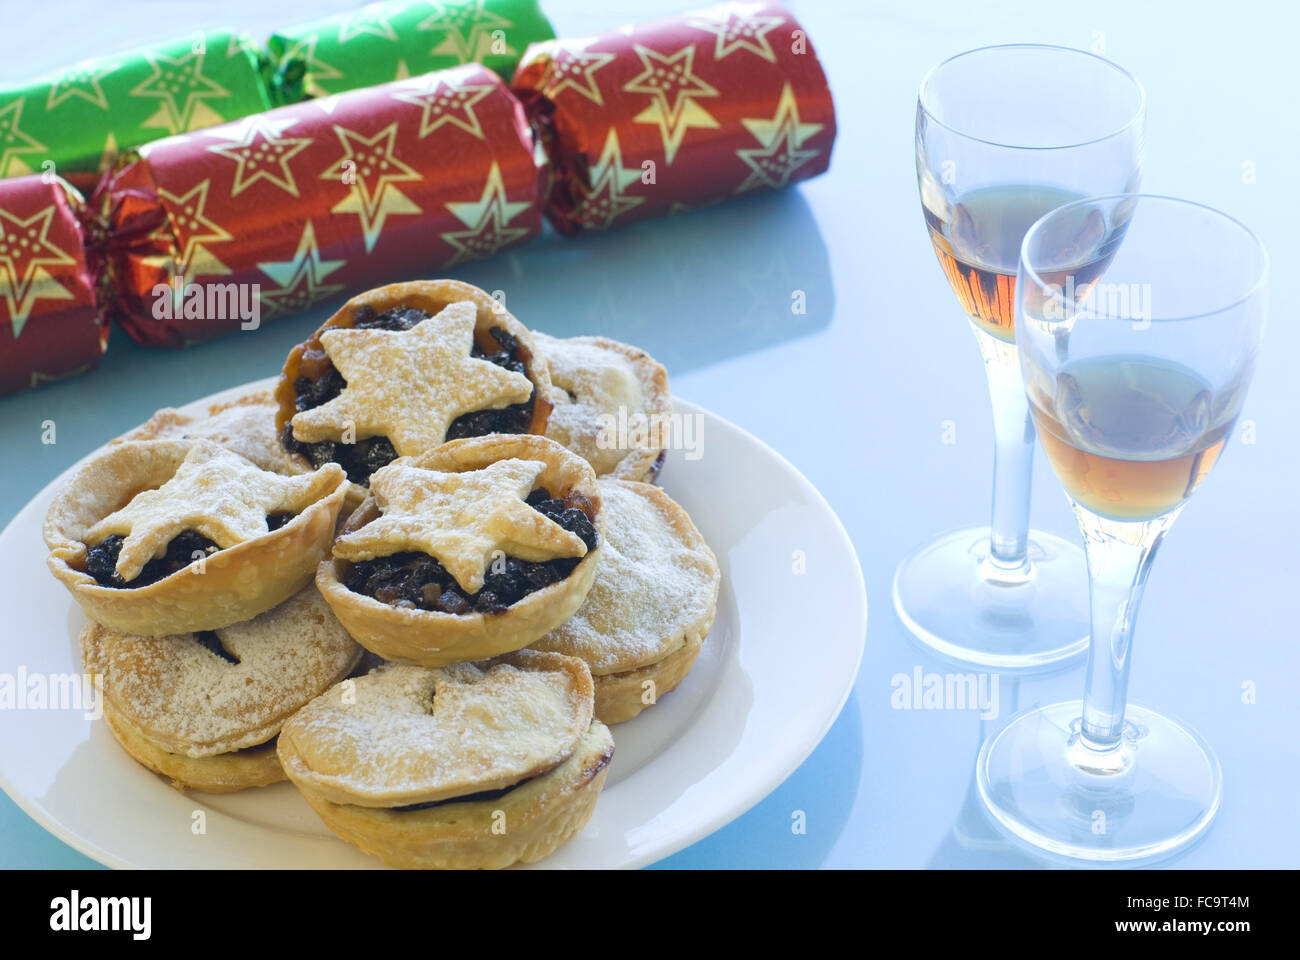 Mince pies and Sherry Stock Photo